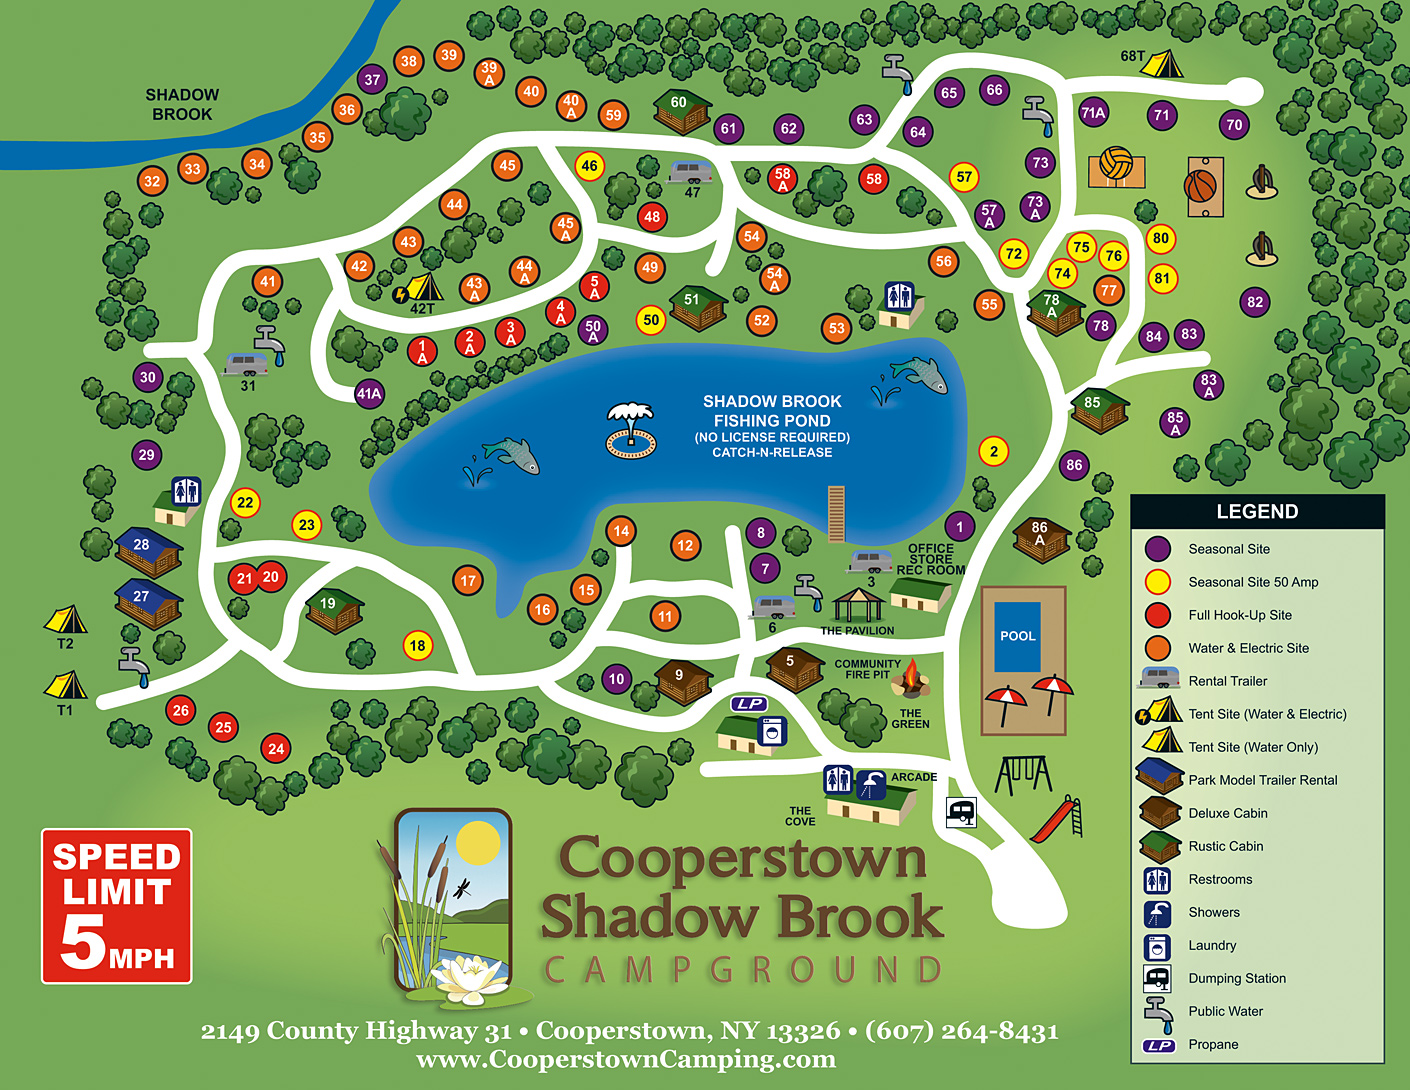 Cooperstown Shadow Brook Campground Site Map